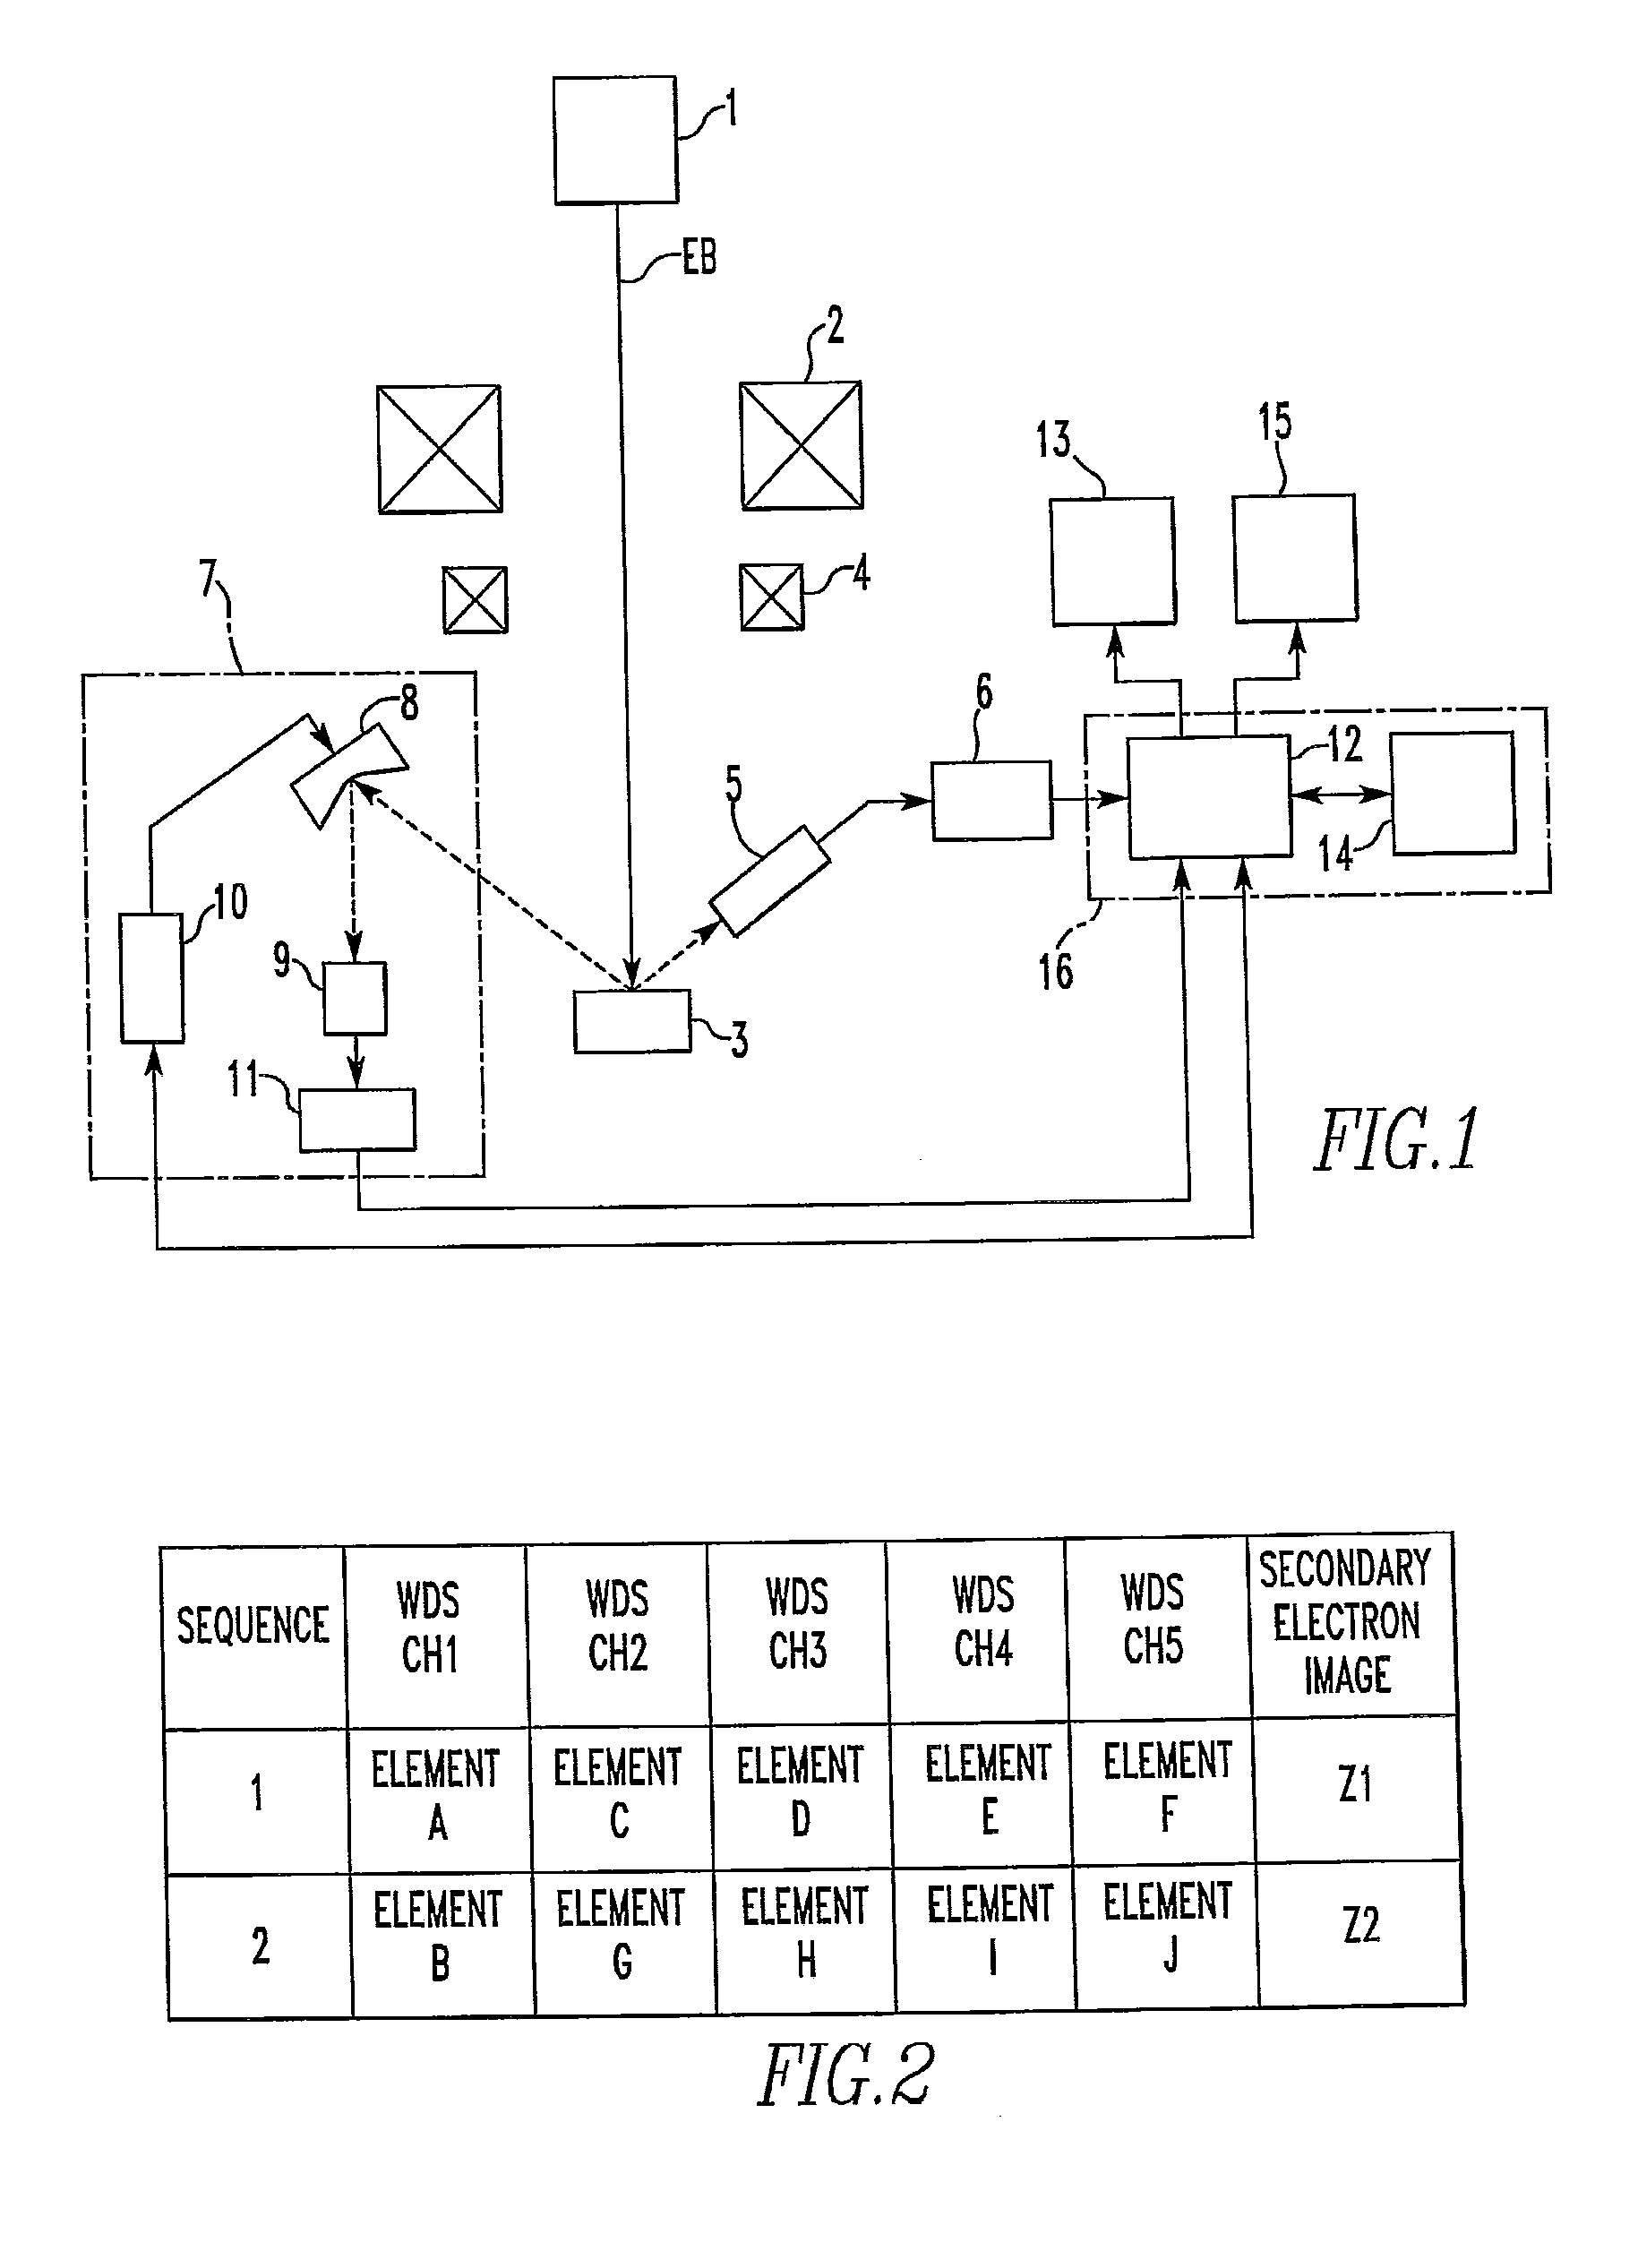 Electron Probe Microanalyzer and Data Processing Method Implemented Therein